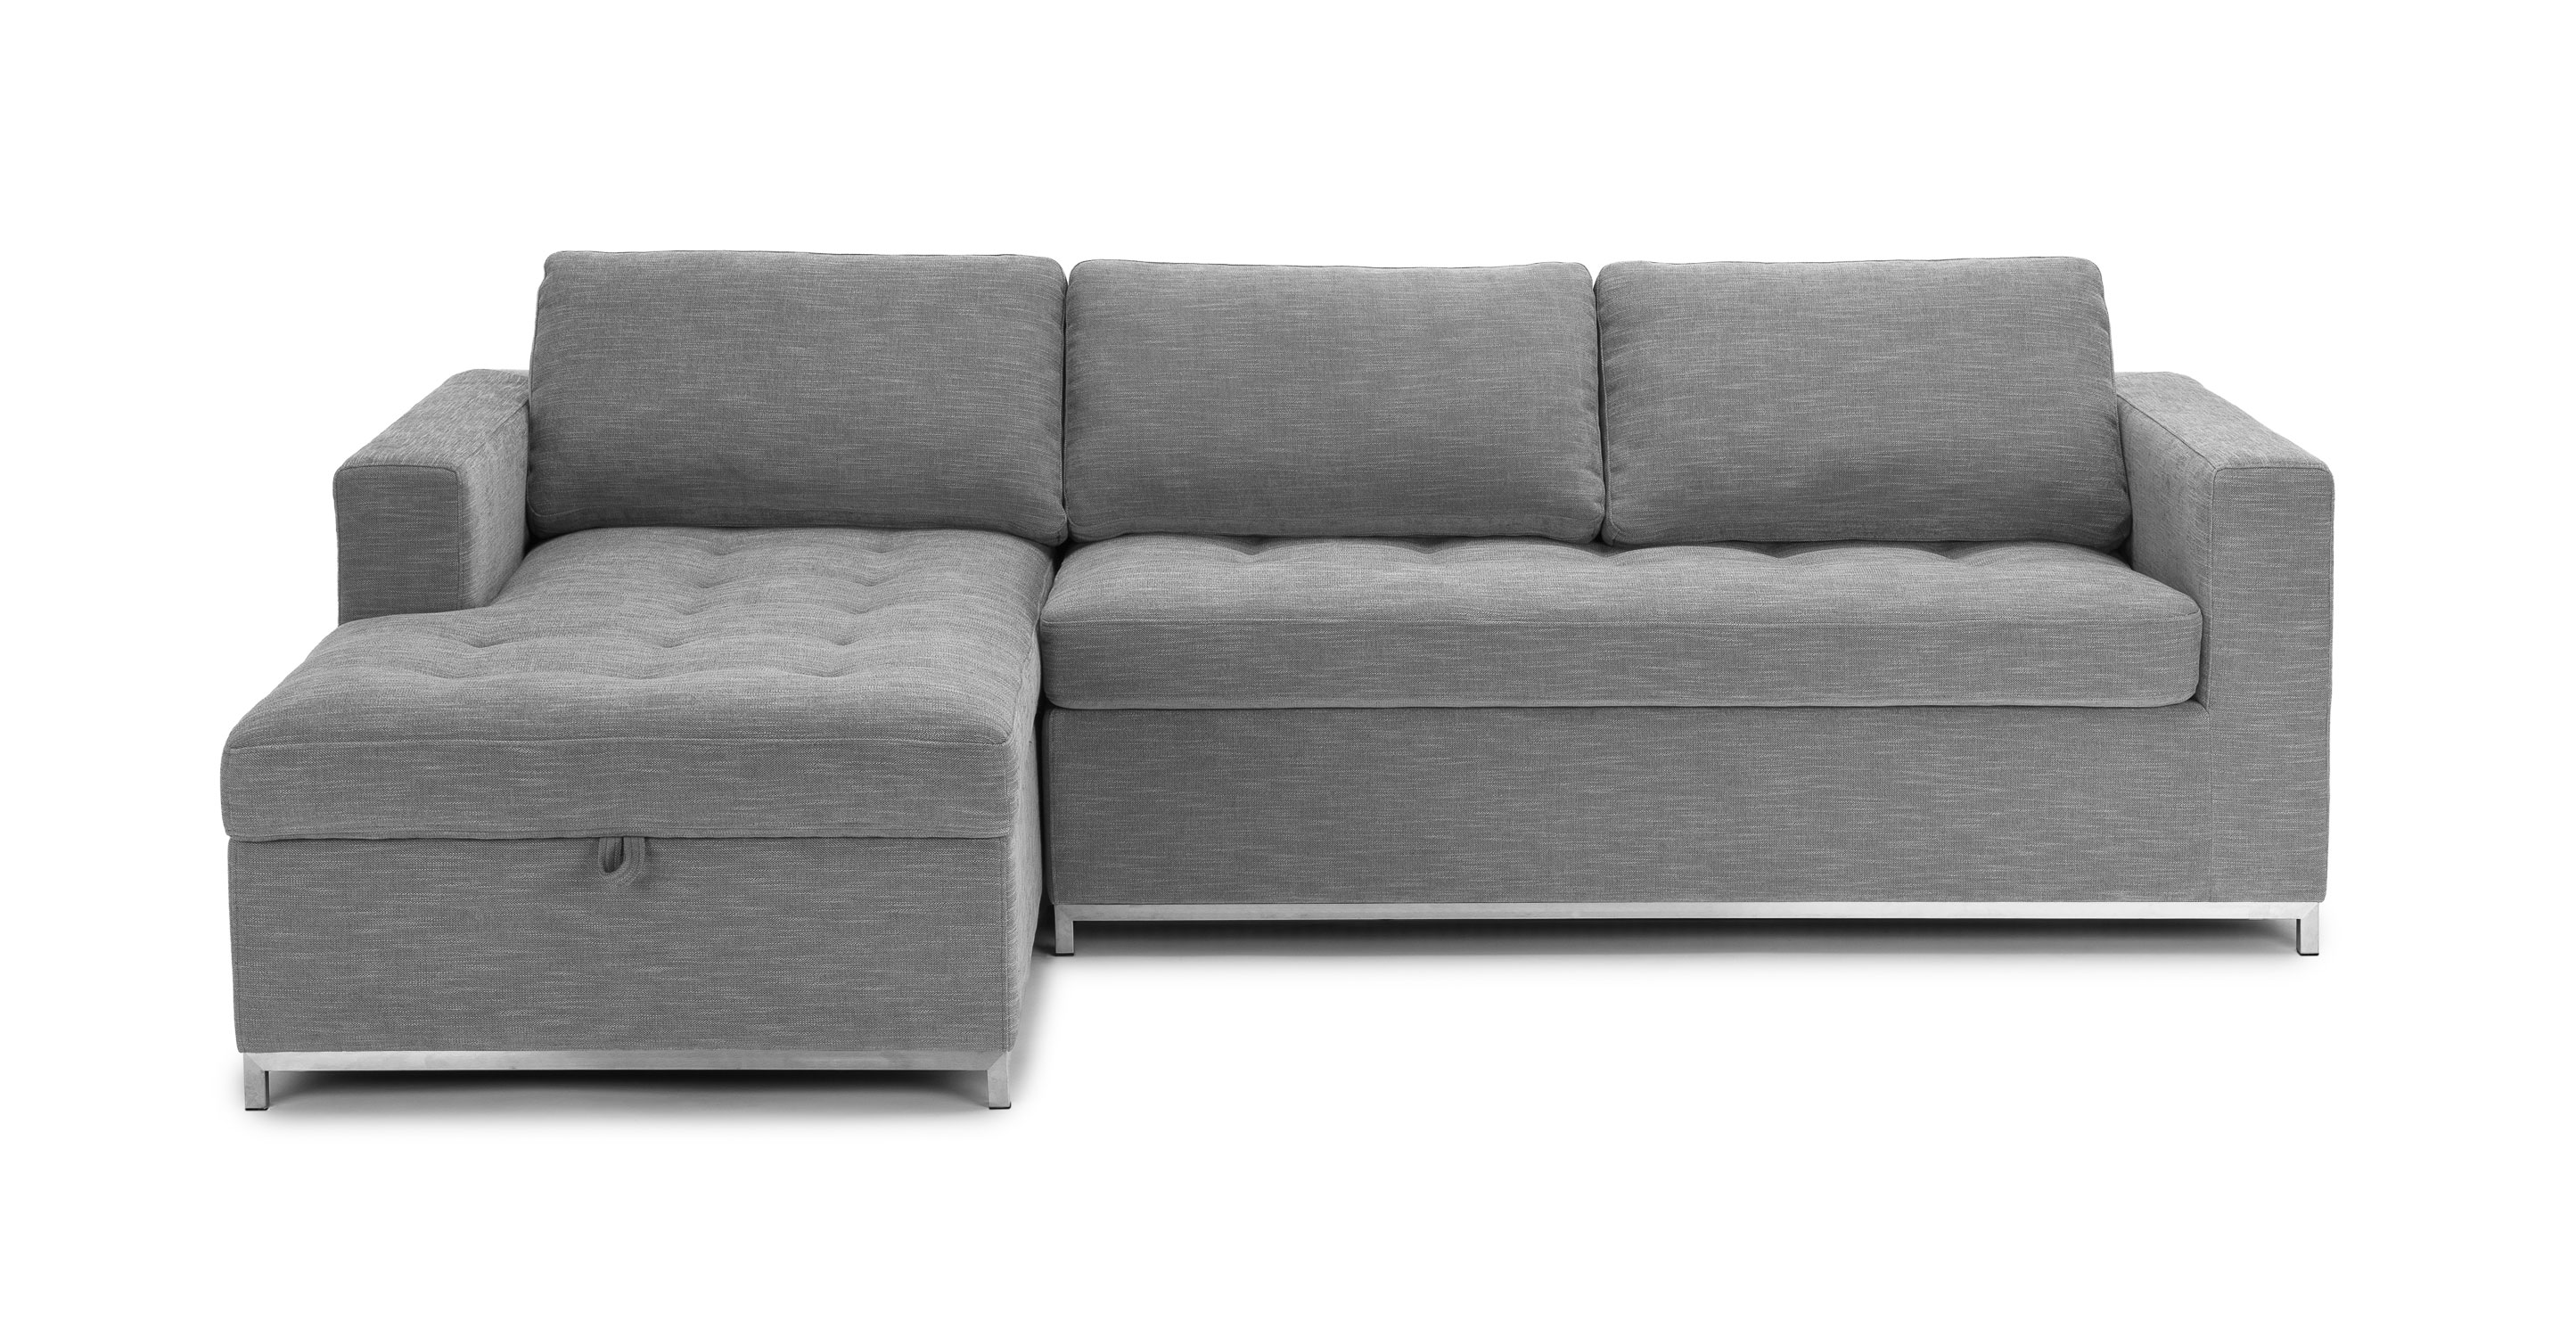 soma dawn gray left sofa bed - sectionals - article | modern, mid-century OOPPTVN